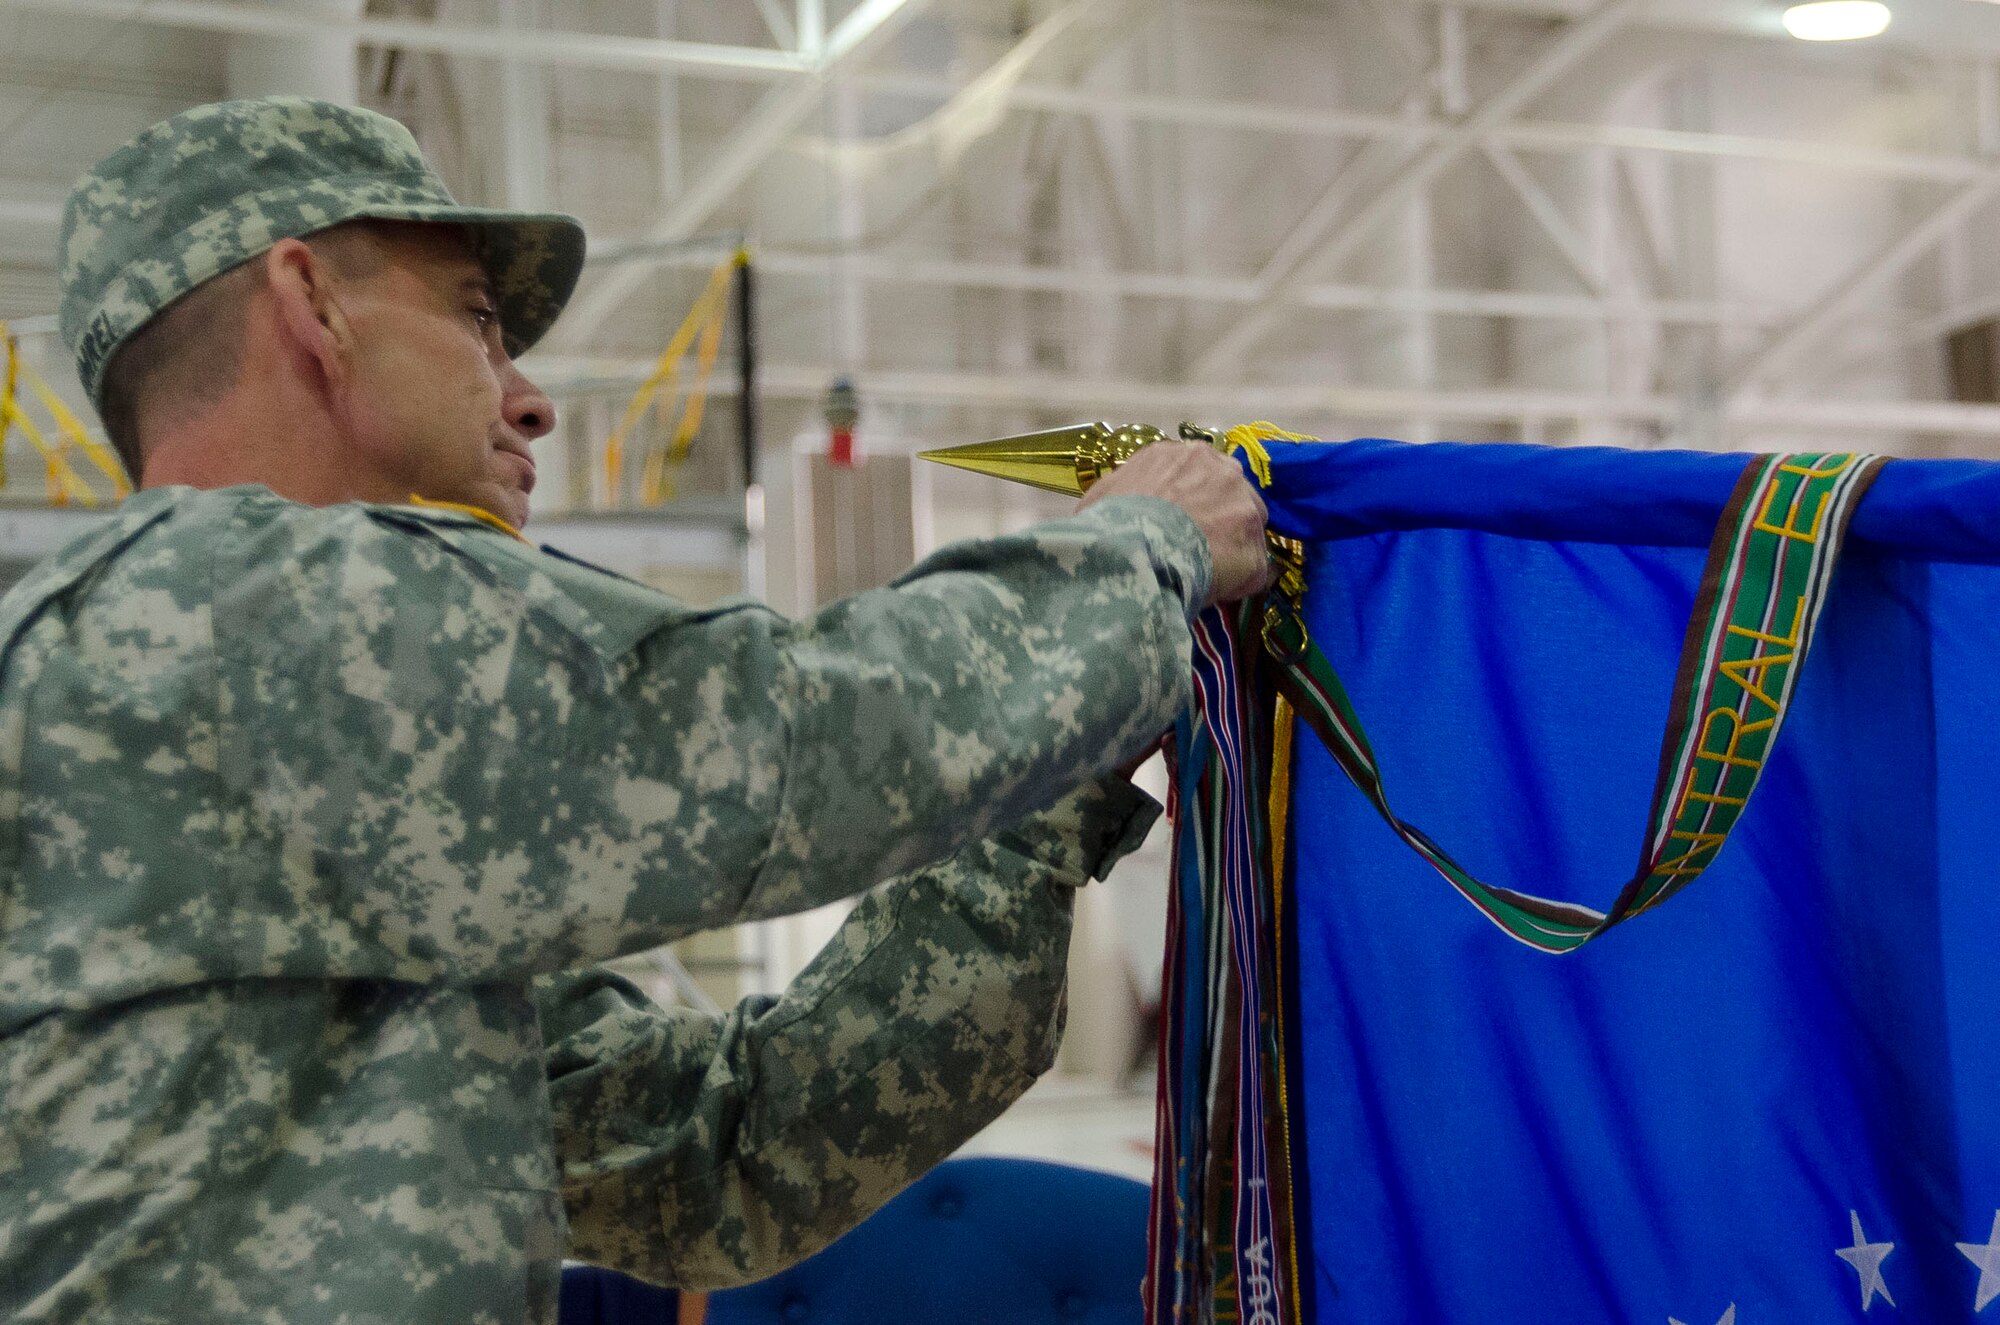 Army Maj. Gen. Daniel M. Krumrei, the 38th Adjutant General of the State of Illinois, attaches the Air Force Oustanding Unit Award banner to the 126th Air Refueling Wing flag at Scott Air Force Base, Saturday, Oct. 4, 2014. The Illinois Air National Guard unit received the award for distinguishing itself for exceptionally meritorious service from Oct. 1, 2011 to Sept. 30, 2013. (Air National Guard photo by Master Sgt. Ken Stephens)